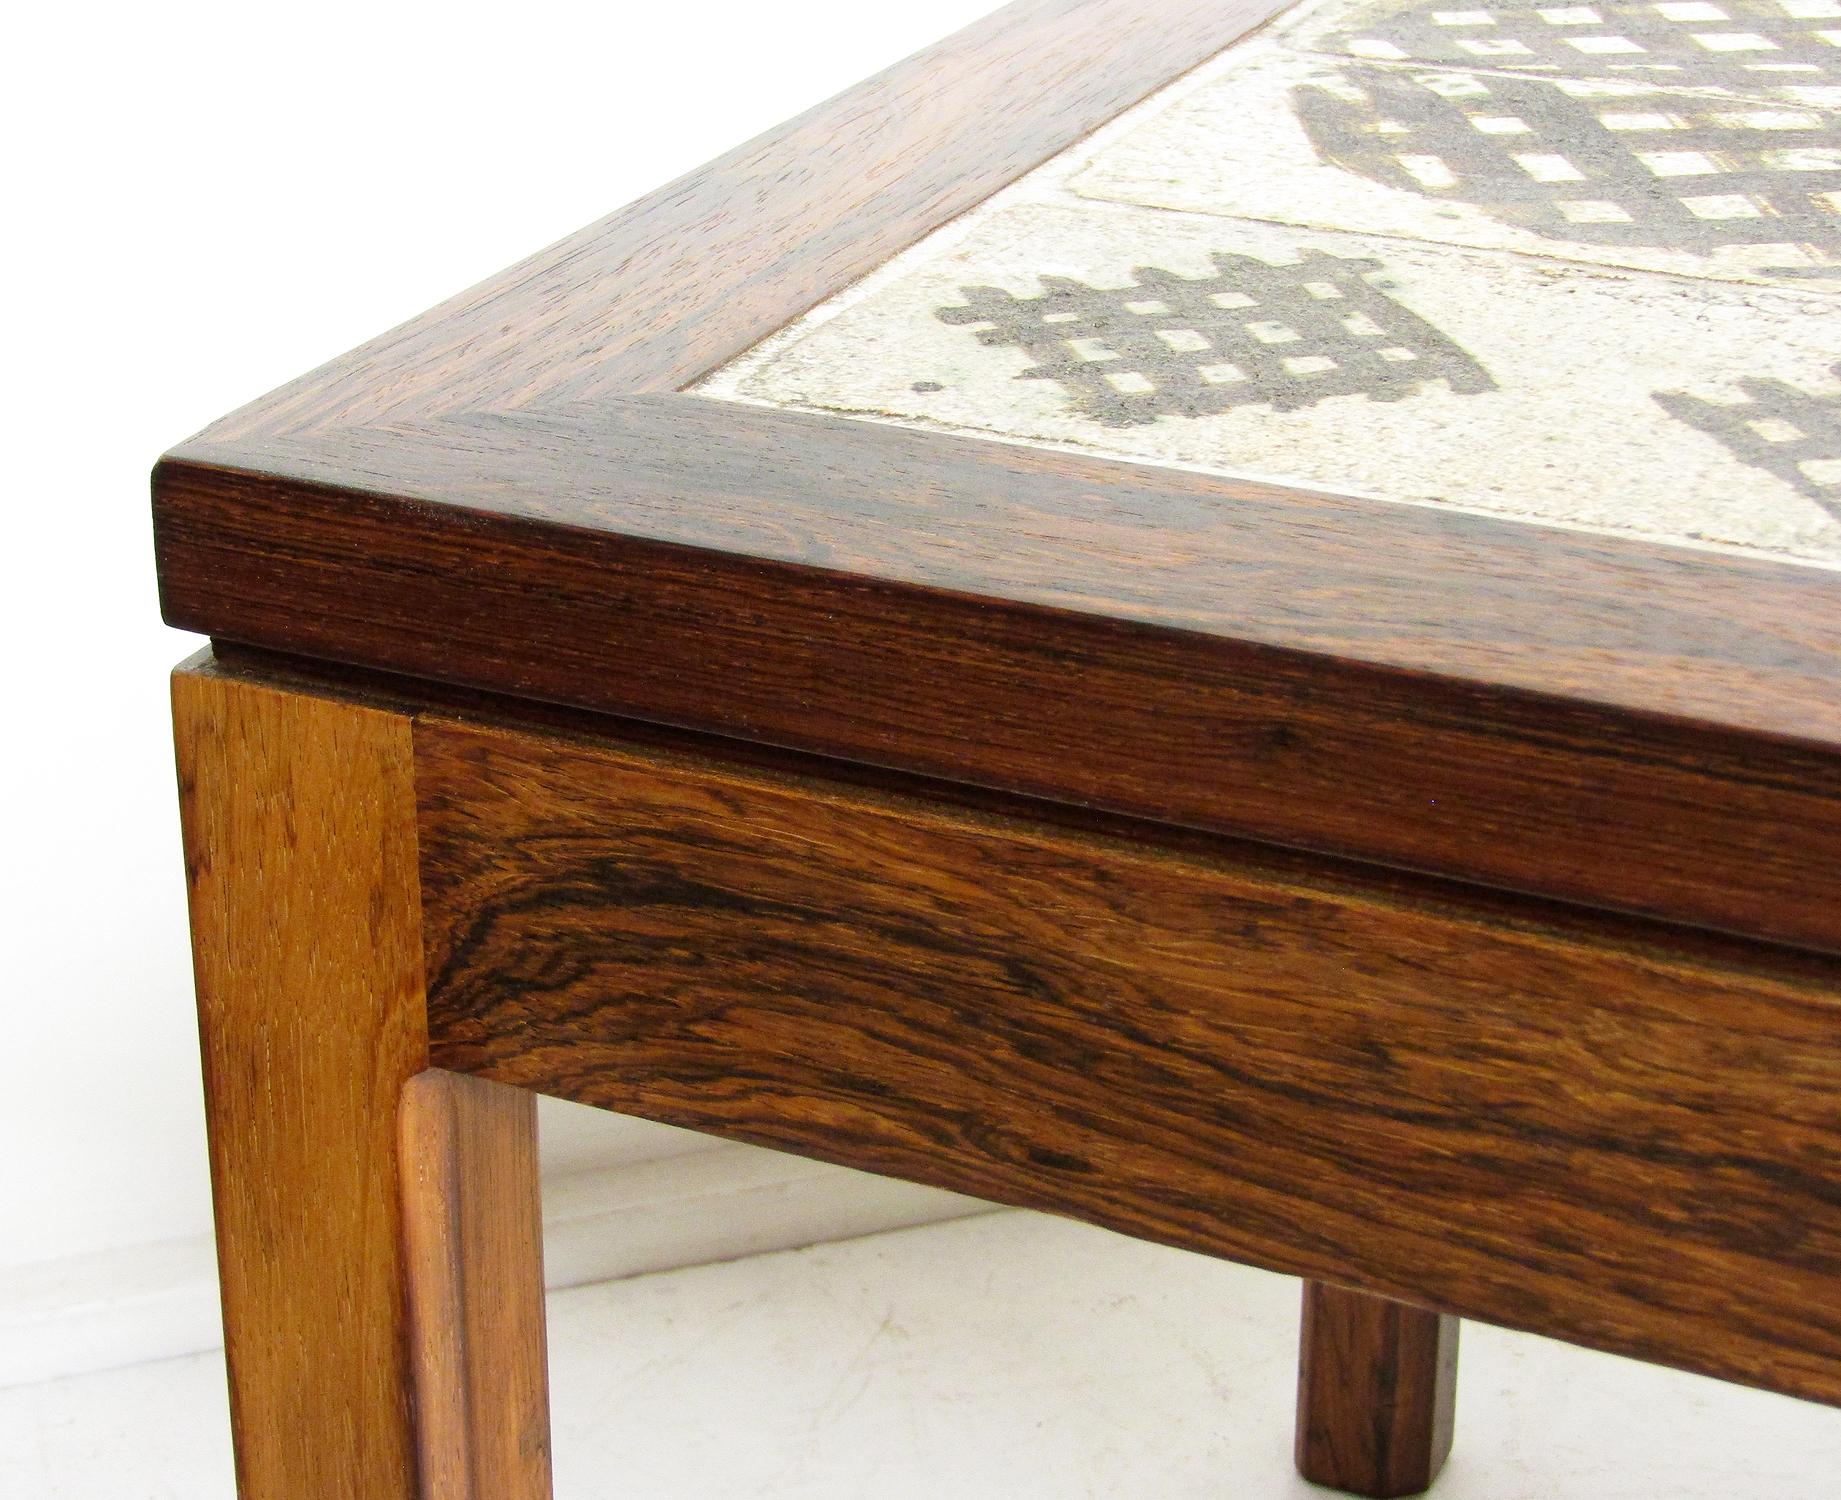 Large 1970s Danish Art Tile Coffee Table in Rosewood by Tue Poulsen & Eric Wörtz For Sale 3